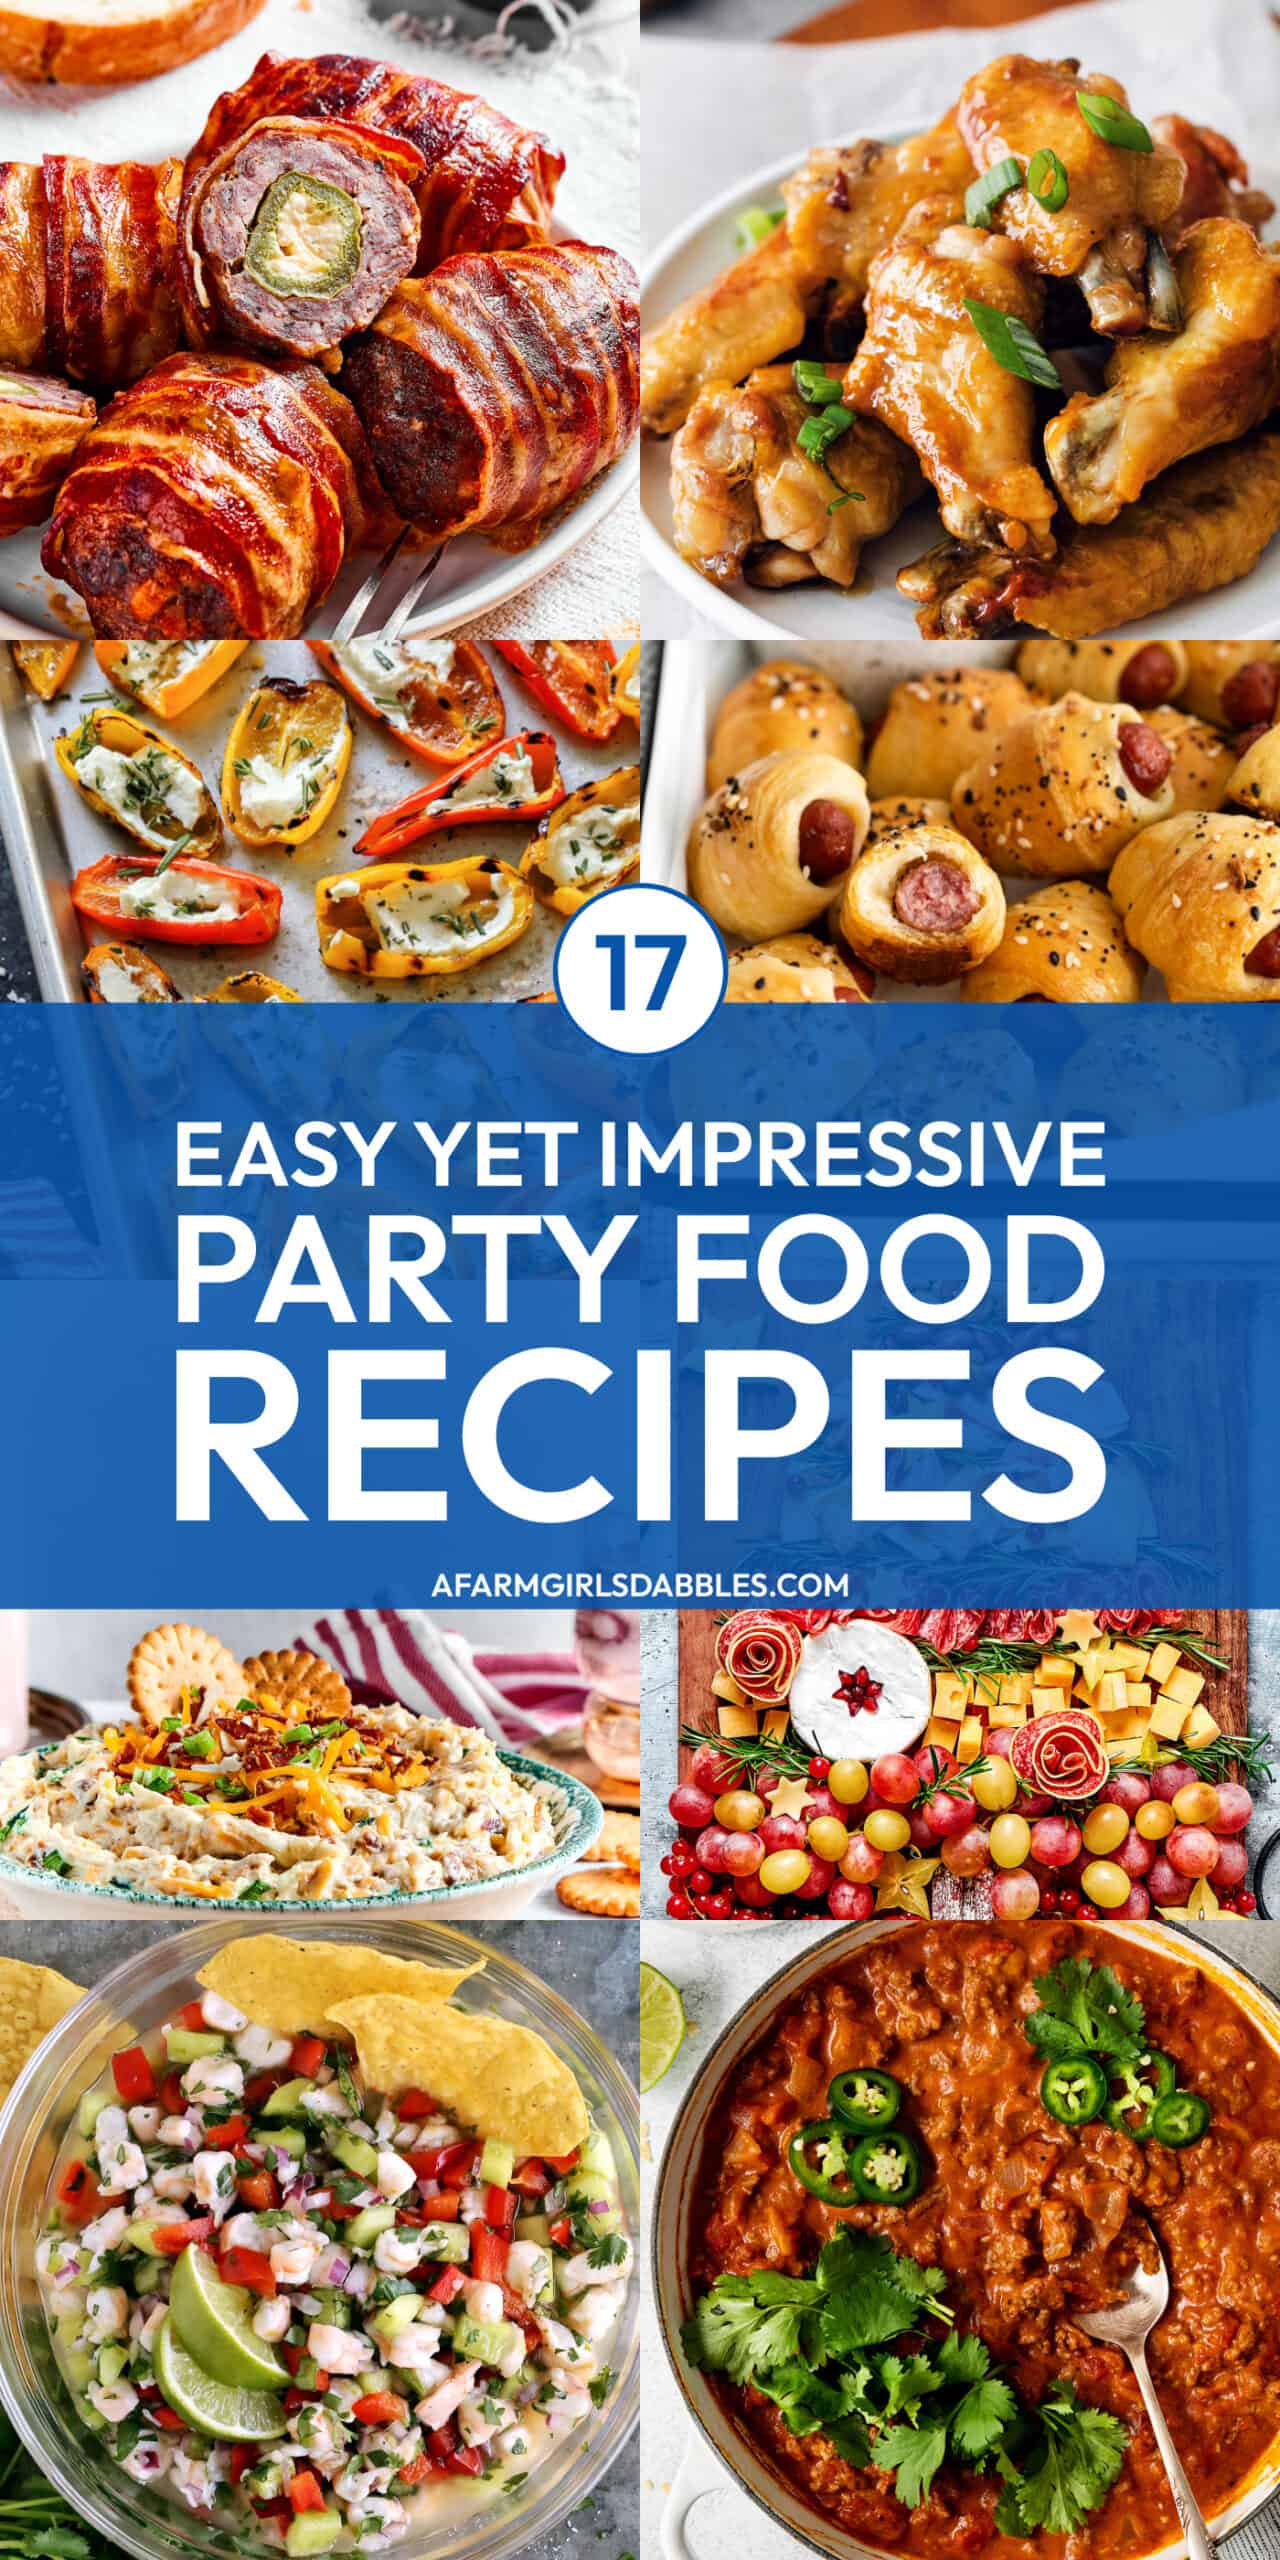 Pinterest image for 17 easy yet impressive party food recipes